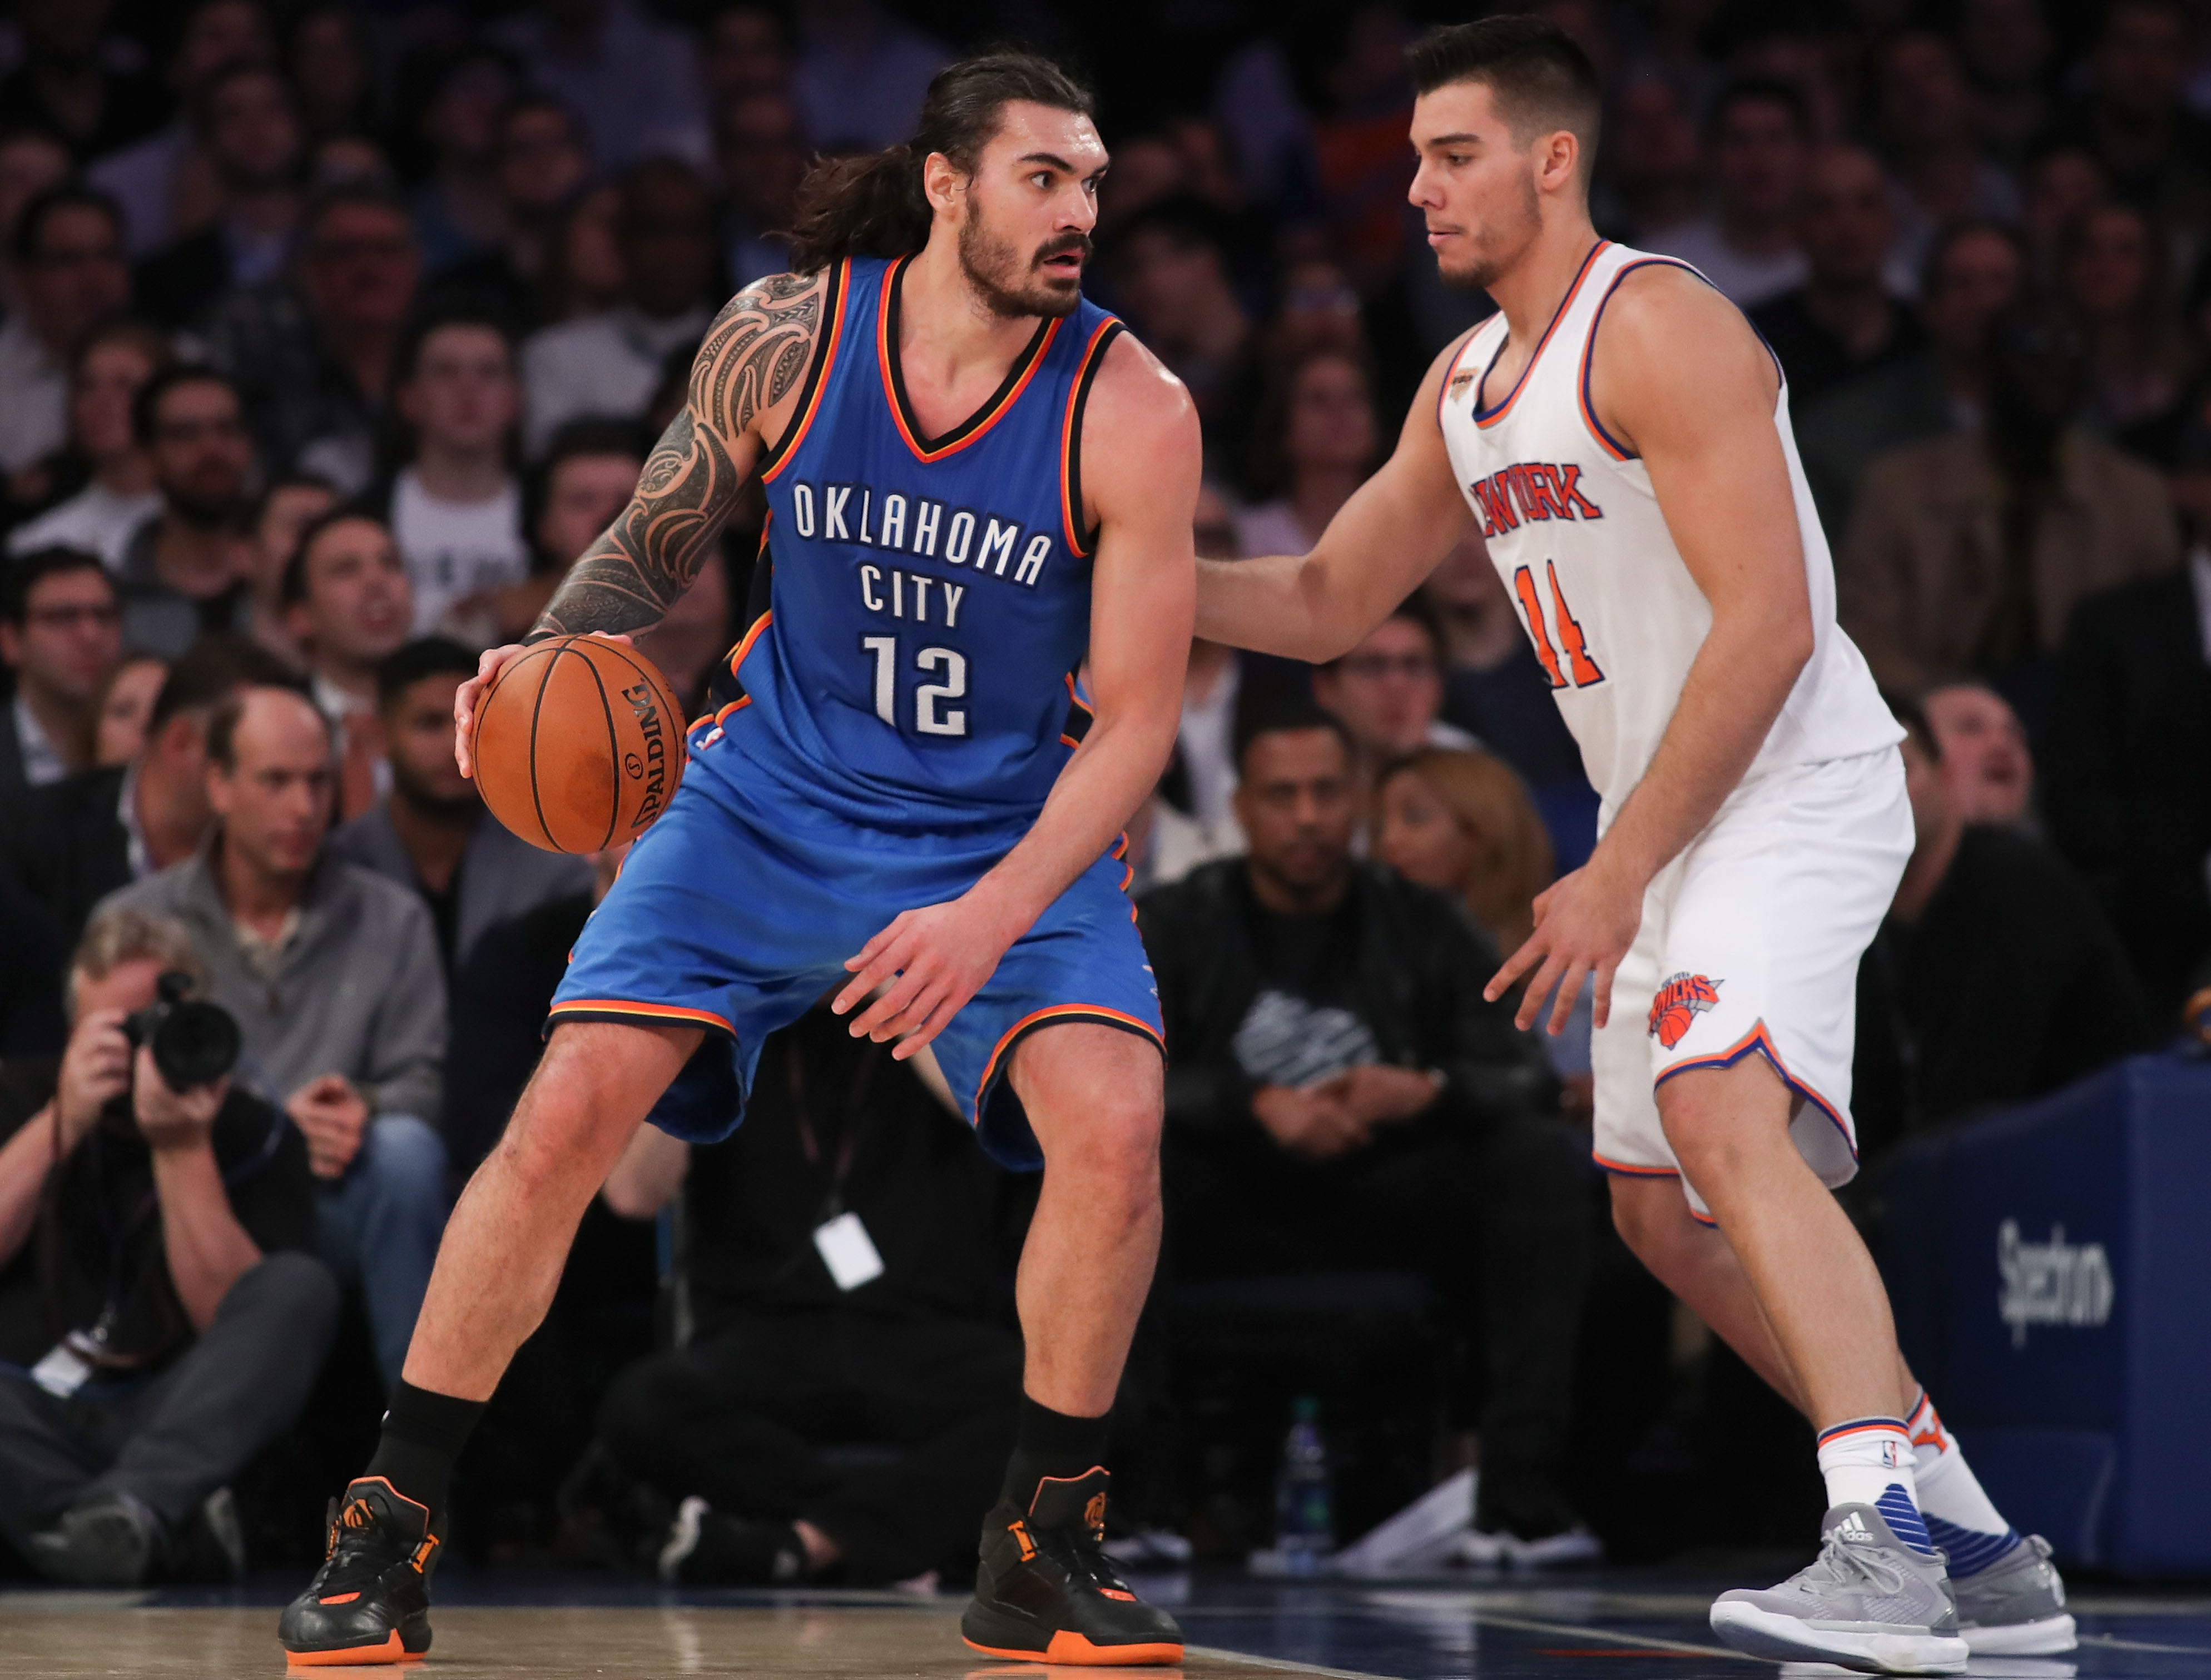 NEW YORK, NY - NOVEMBER 28: Steven Adams #12 of the Oklahoma City Thunder drives to the basket defended by Willy Hernangomez #14 of the New York Knicks during the second half at Madison Square Garden on November 28, 2016 in New York City. NOTE TO USER: User expressly acknowledges and agrees that, by downloading and or using this photograph, User is consenting to the terms and conditions of the Getty Images License Agreement. (Photo by Michael Reaves/Getty Images)